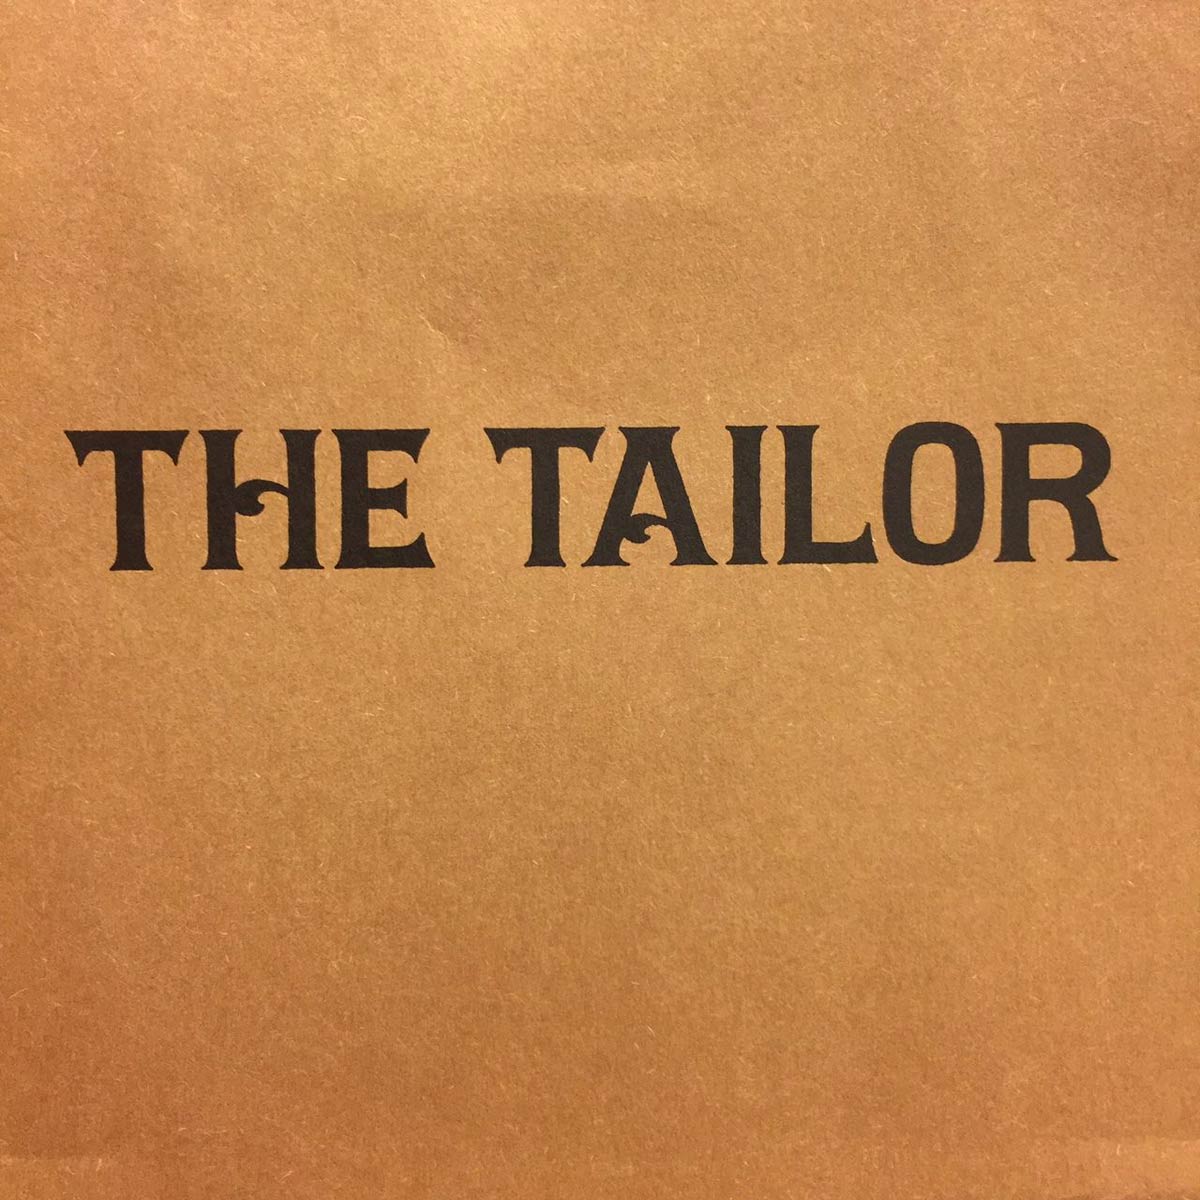 THE TAILOR